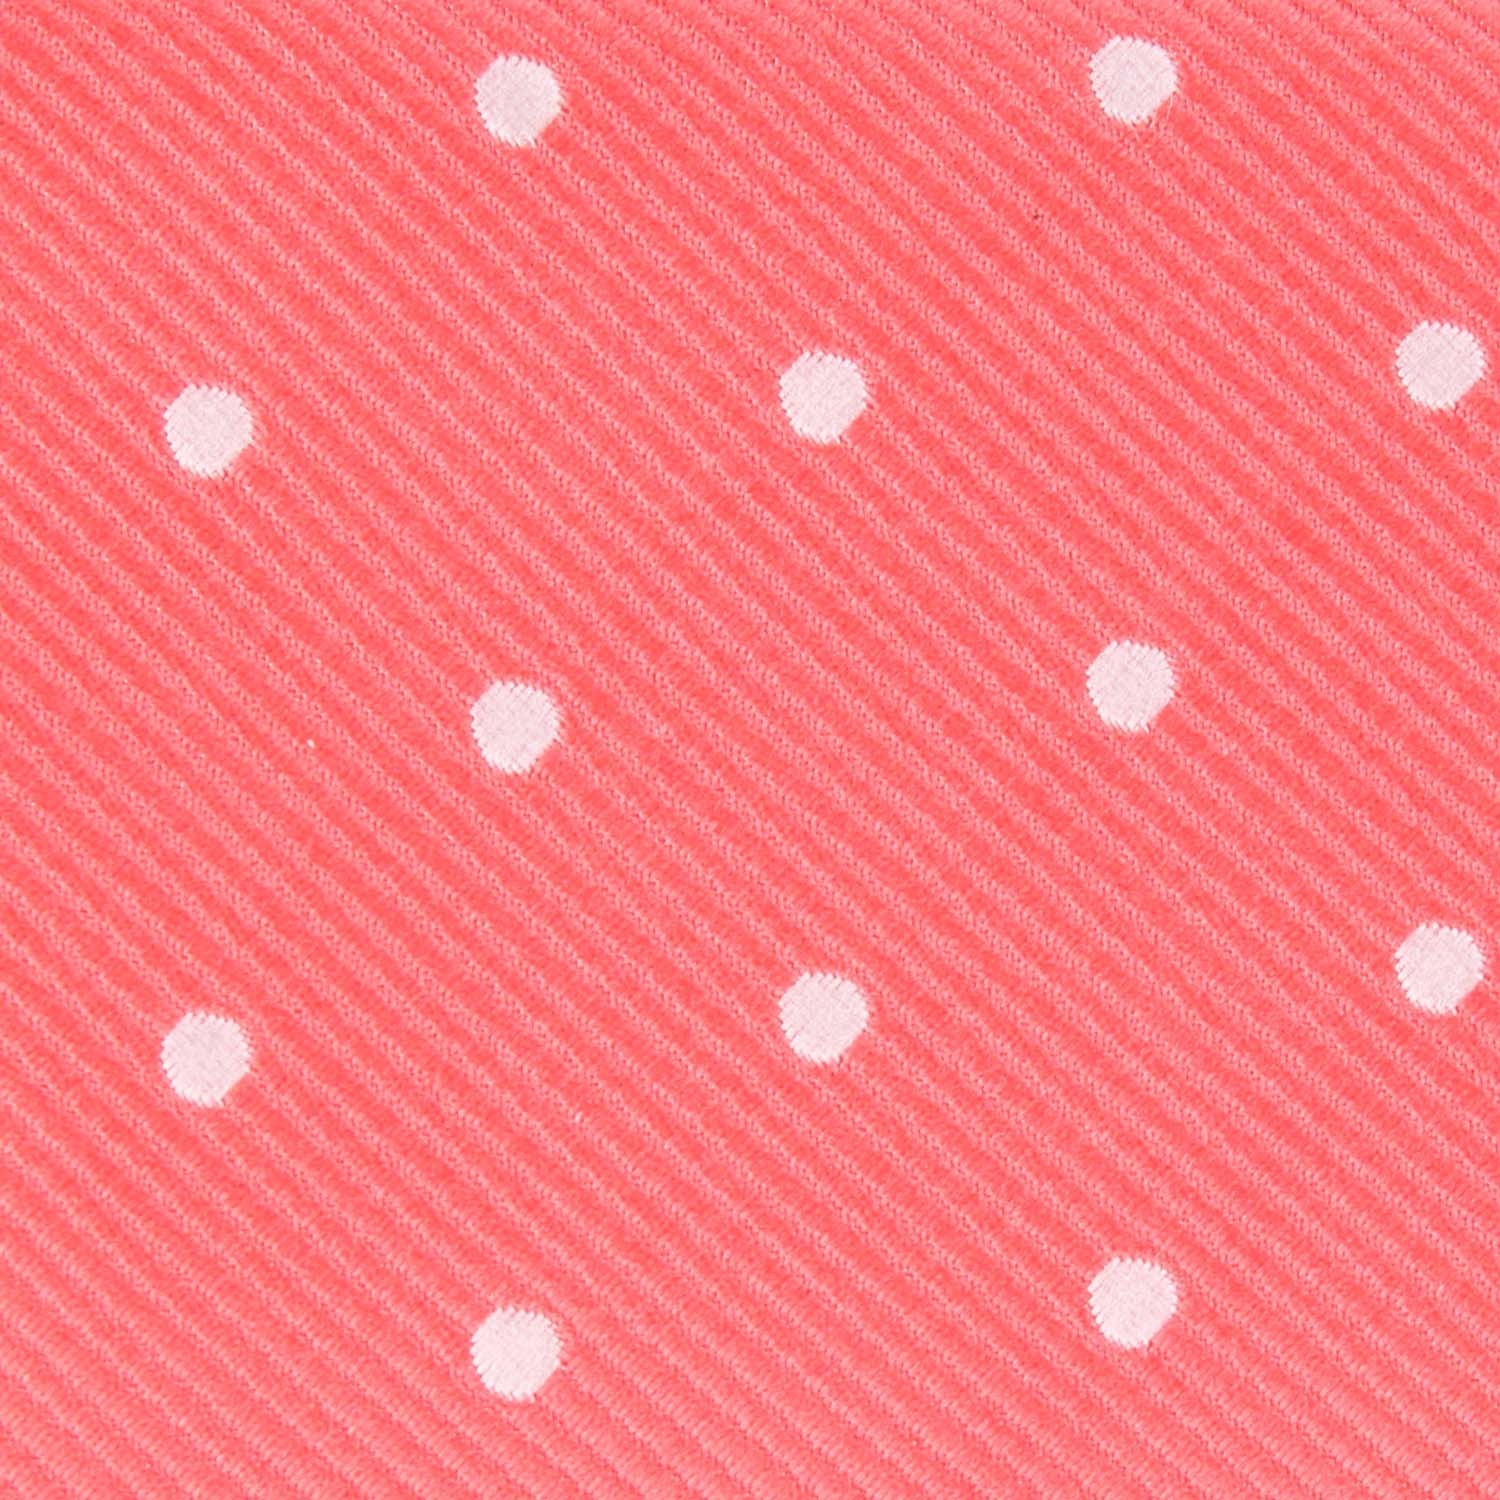 Coral Pink with White Polka Dots Fabric Pocket Square M139